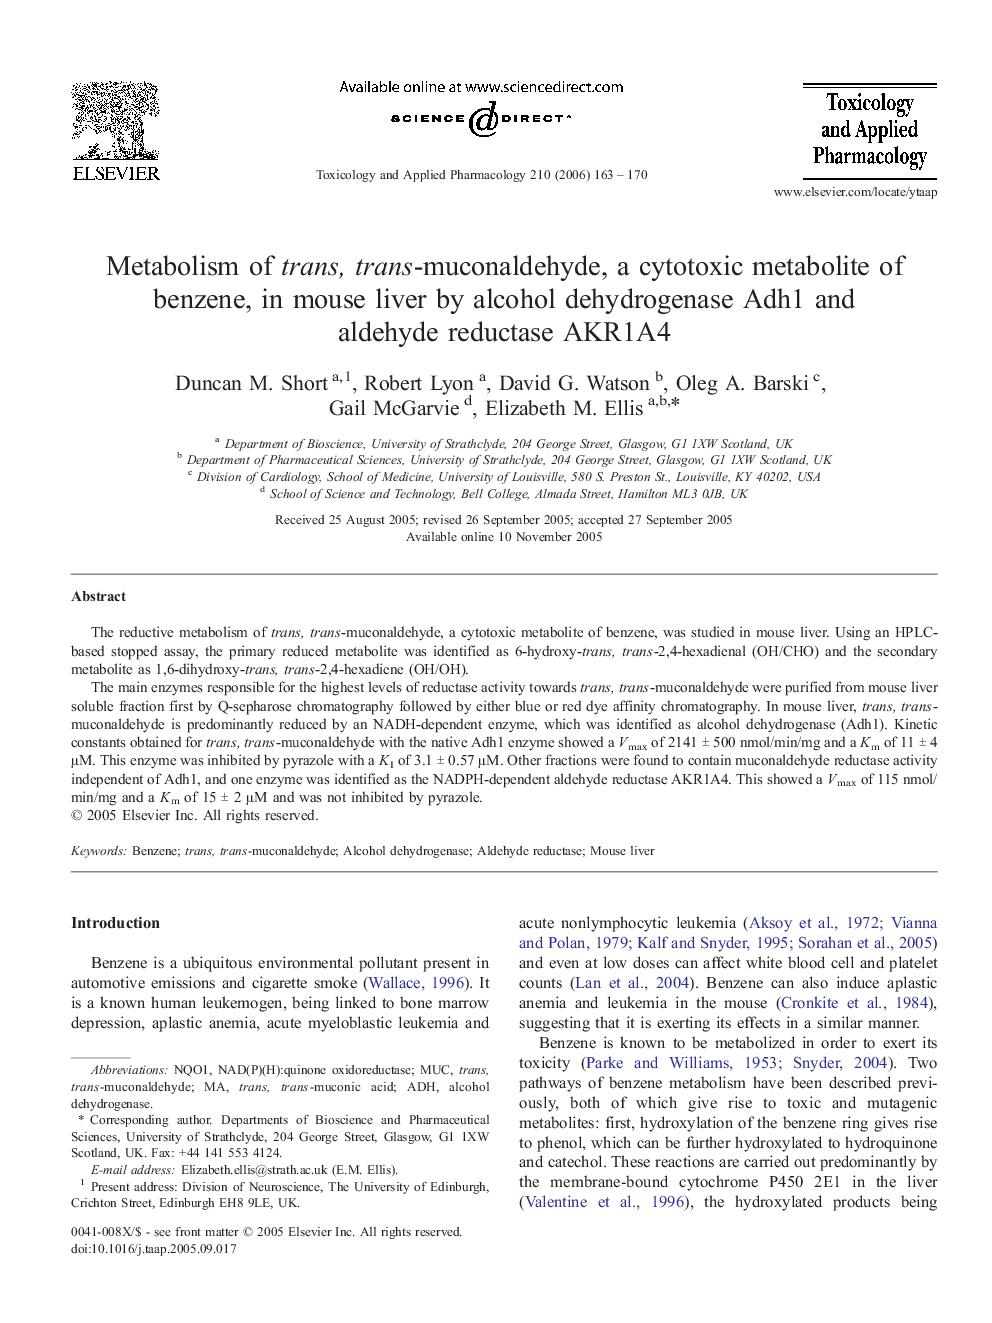 Metabolism of trans, trans-muconaldehyde, a cytotoxic metabolite of benzene, in mouse liver by alcohol dehydrogenase Adh1 and aldehyde reductase AKR1A4